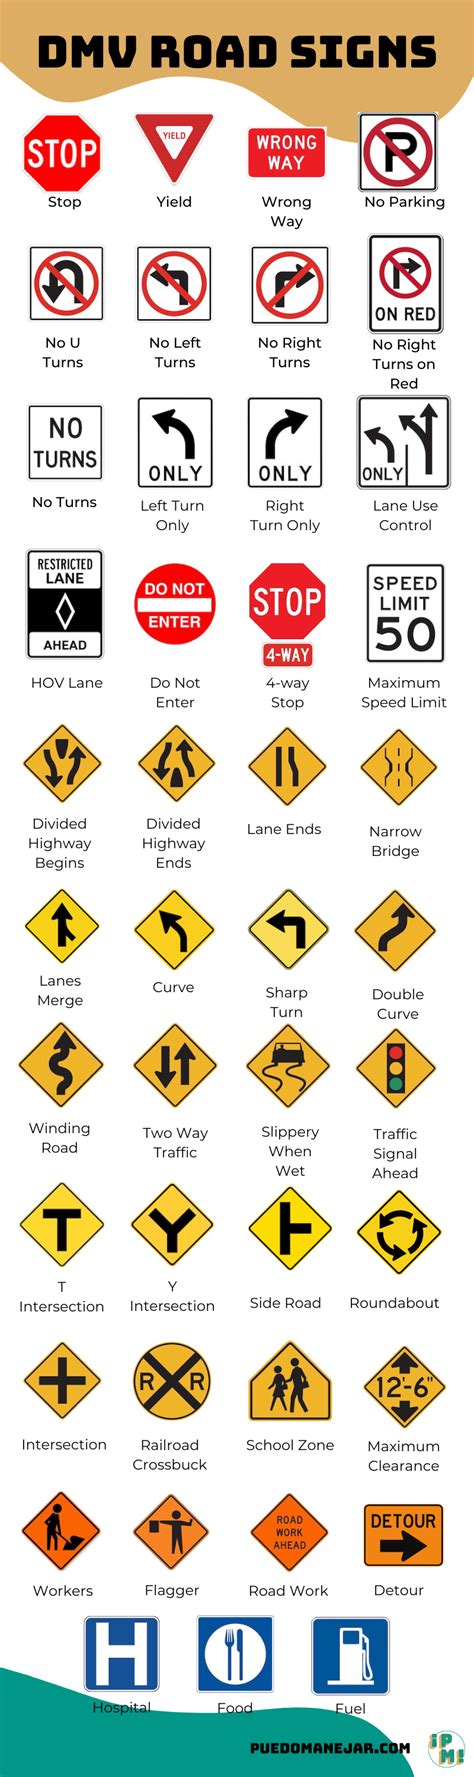 Street signs dmv test. About this test. Half of the written knowledge test for receiving your Georgia instructional permit or driver’s license will be based on road signs. The test consists of two sections of 20 questions each, one focusing on road signs, and the other on road rules. The test will be multiple-choice, and you’ll need to successfully answer at ... 